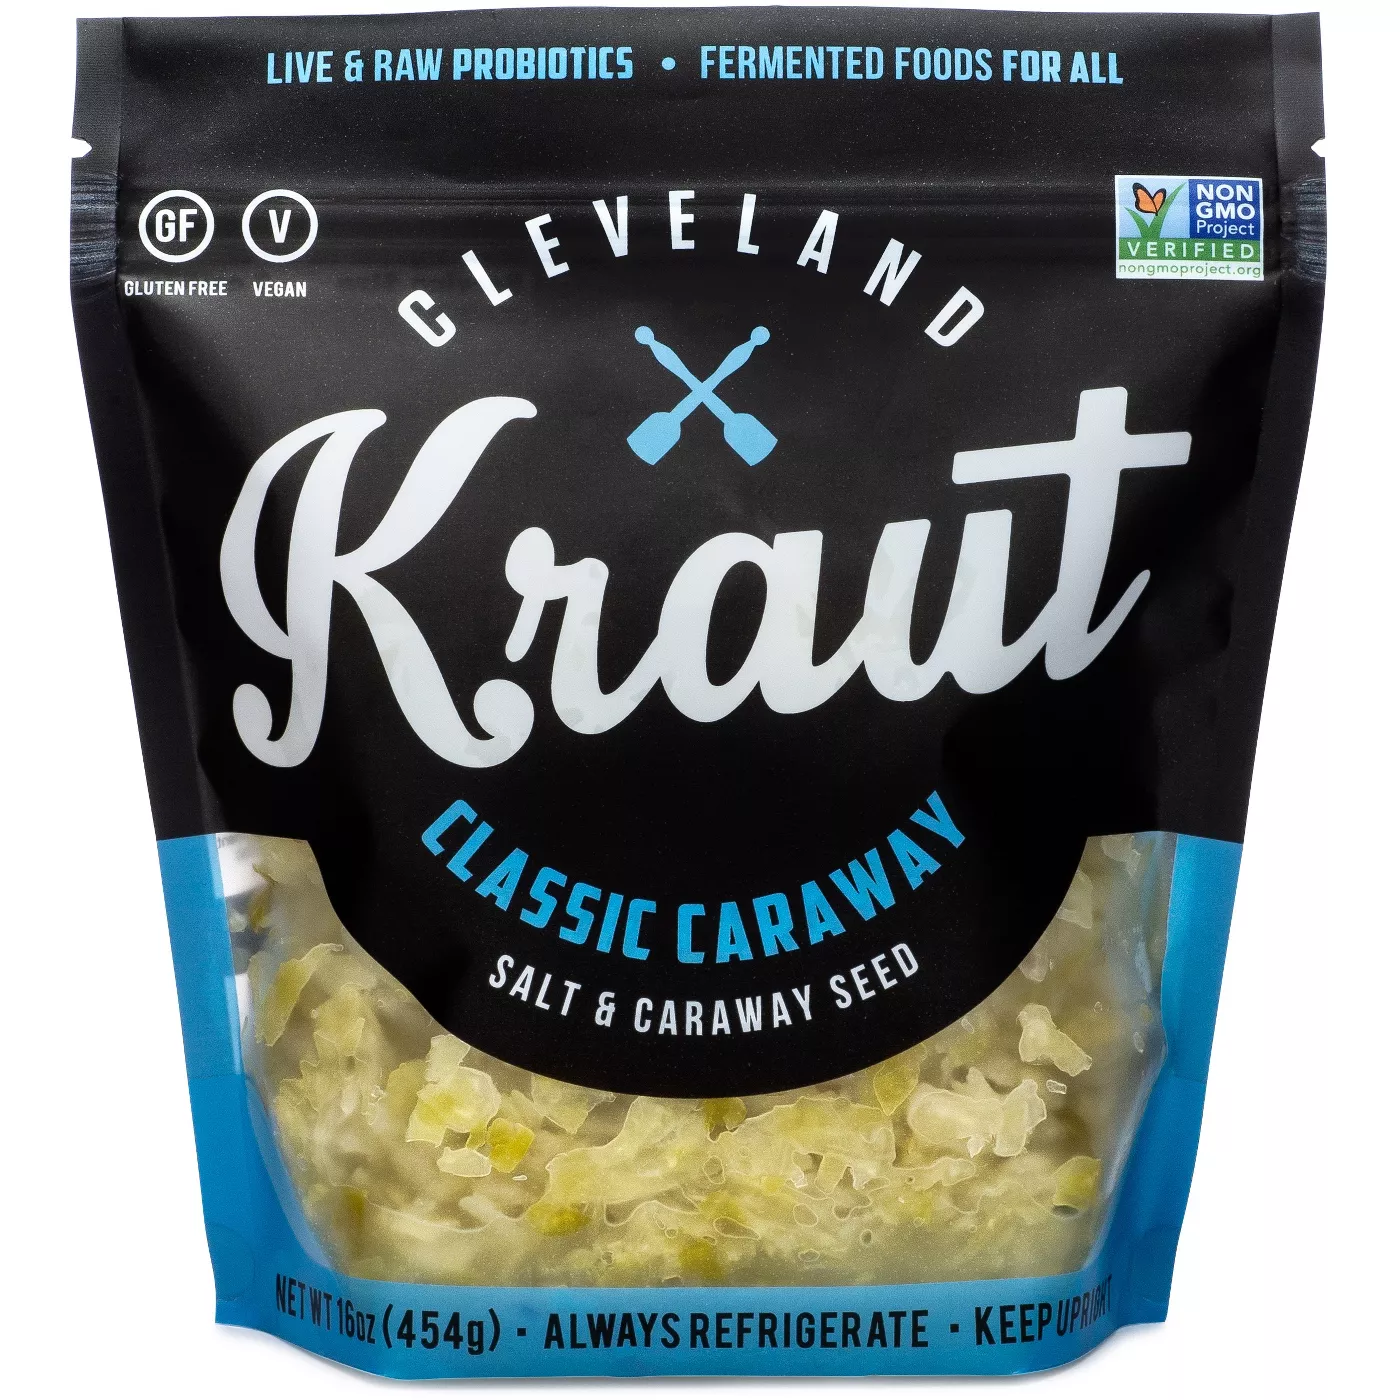 Cleveland Kraut Classic Caraway - 16oz - image 1 of 2